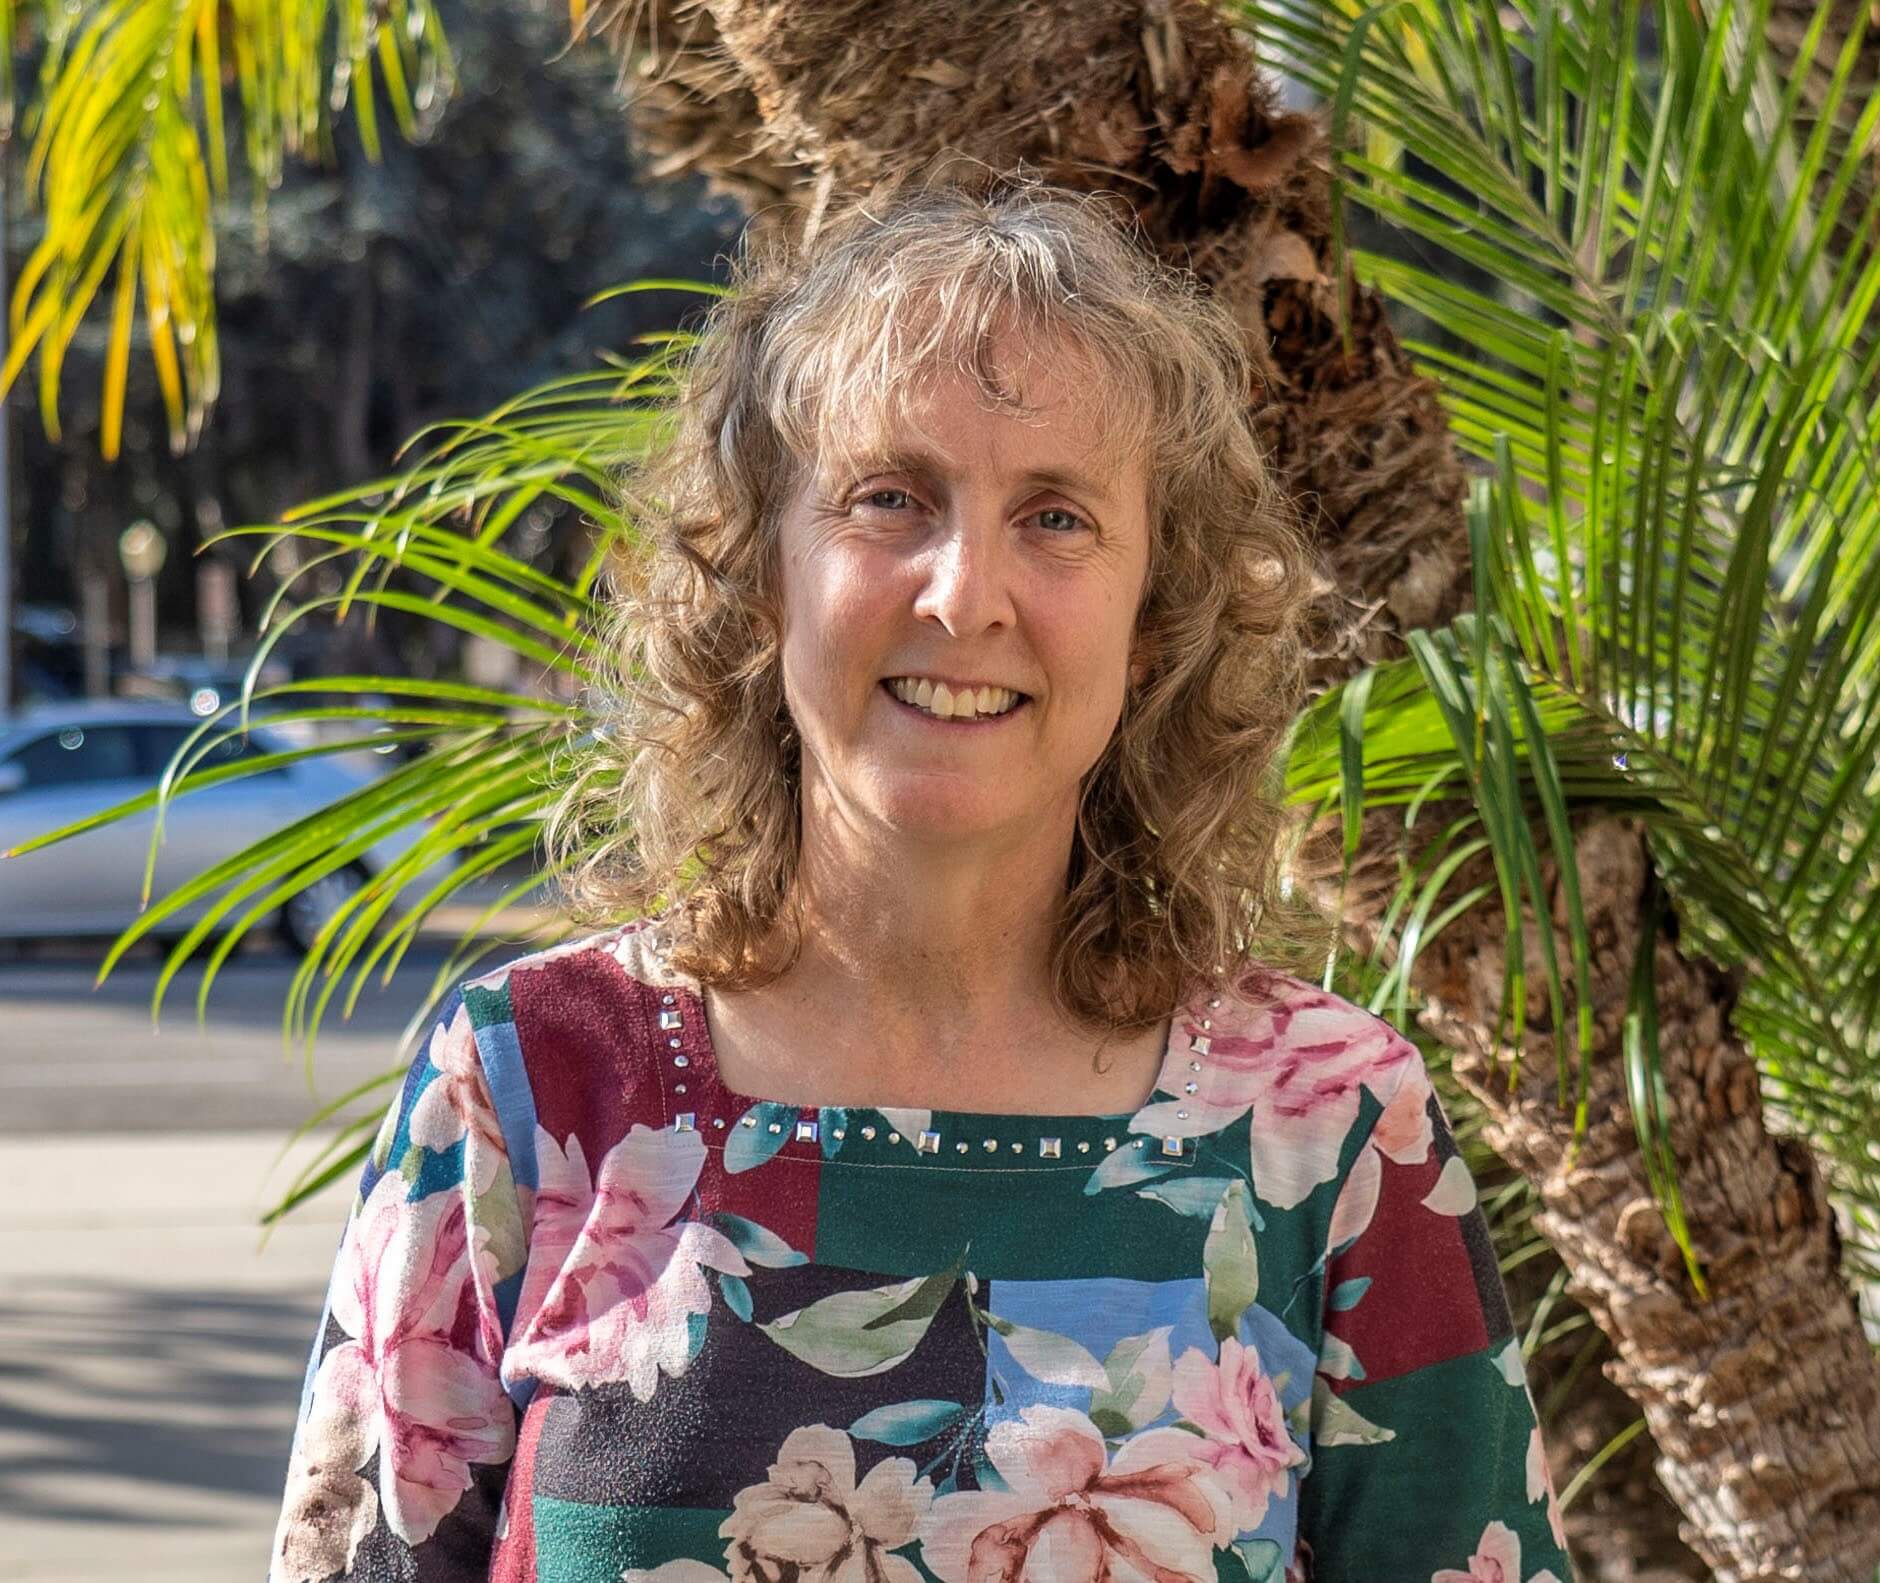 Smiling woman with palm trees in background; Sarah Robson - photo